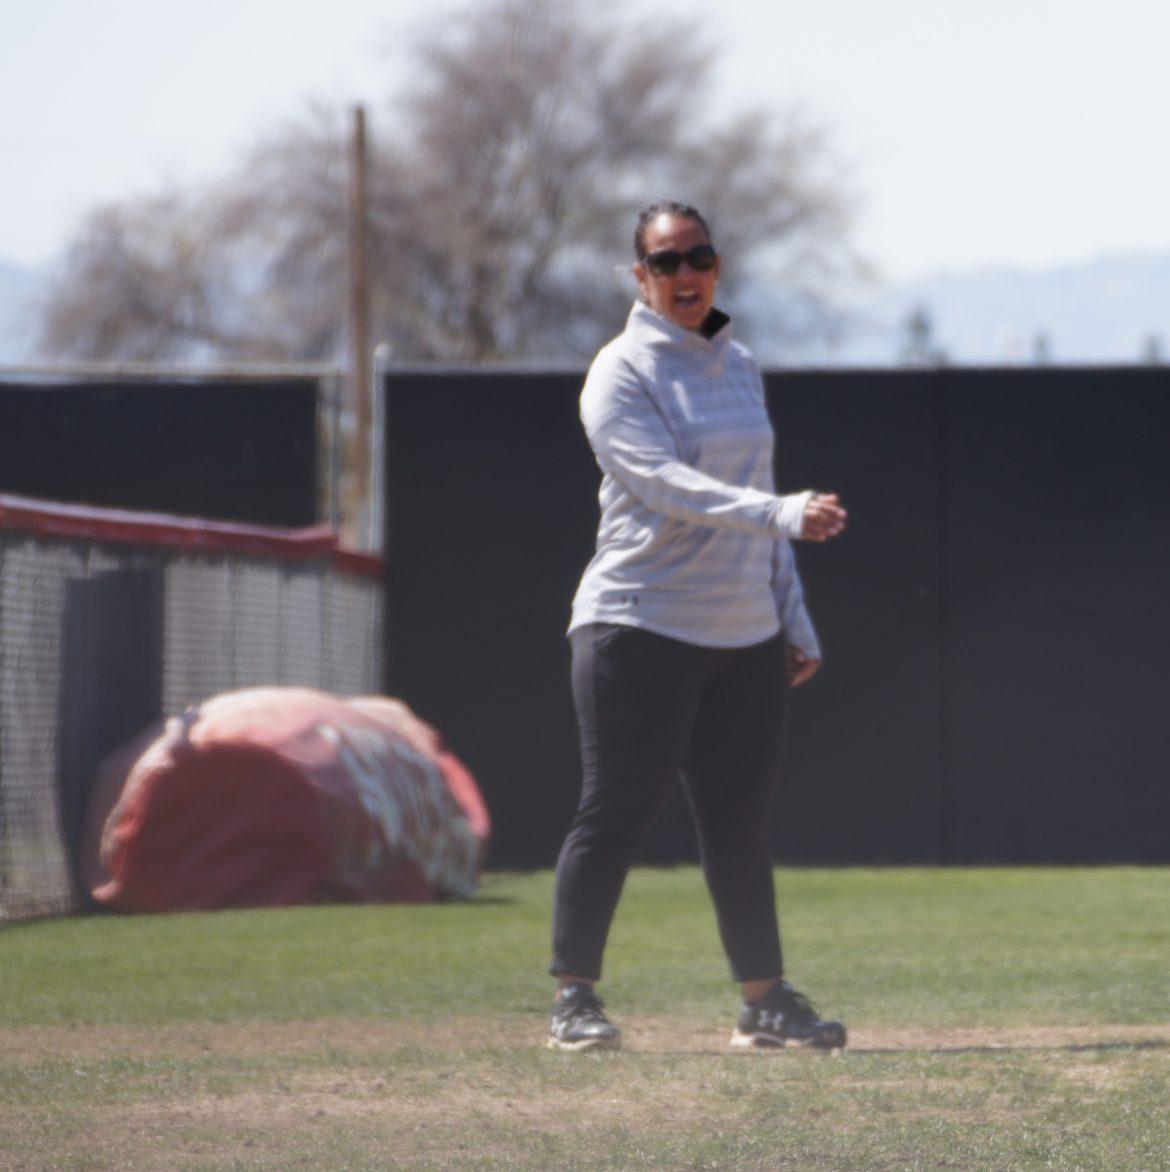 Flowers coaching at third base while the Matadors are up to bat. Photo credit: Bryanna Winner